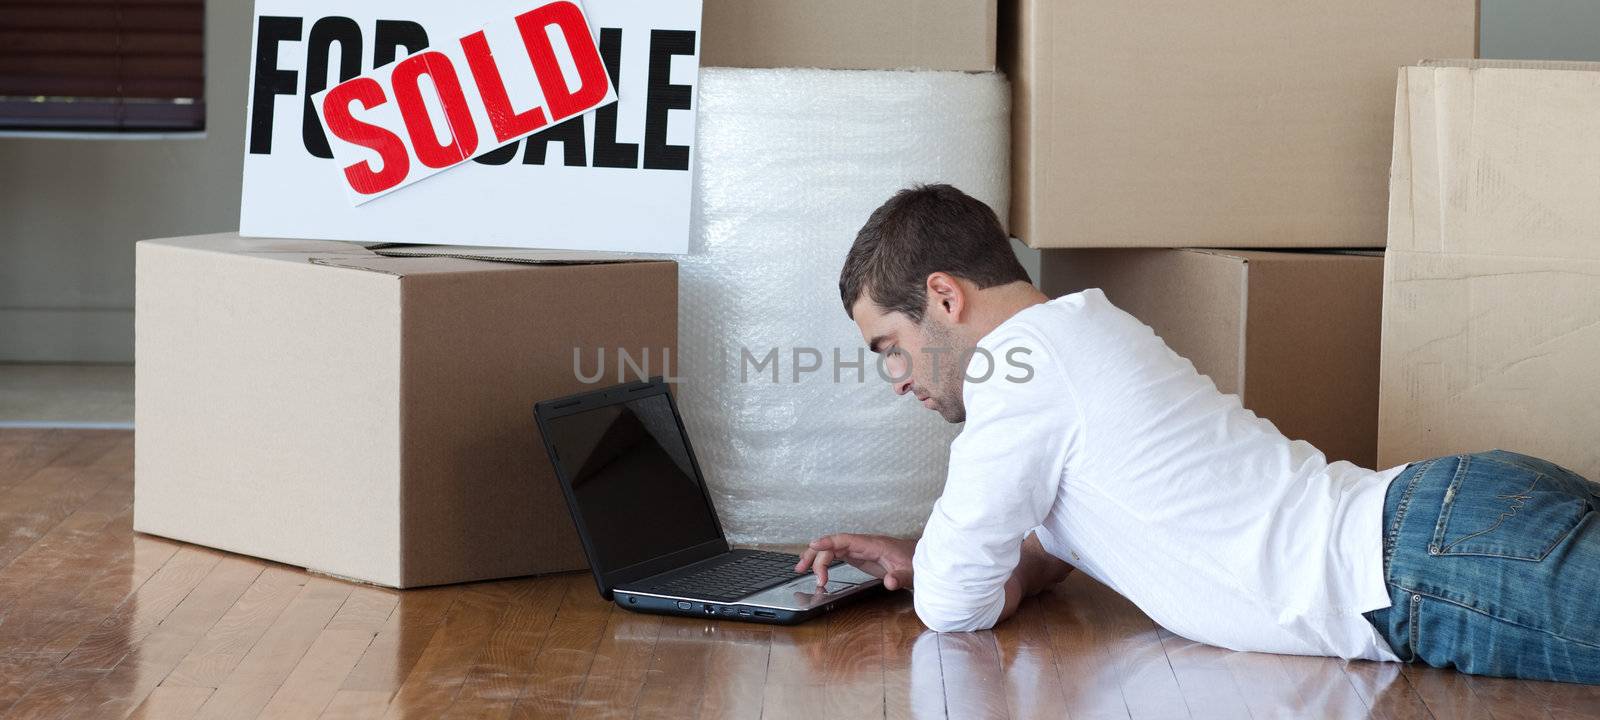 Concentrated man working at his laptop  in his new house